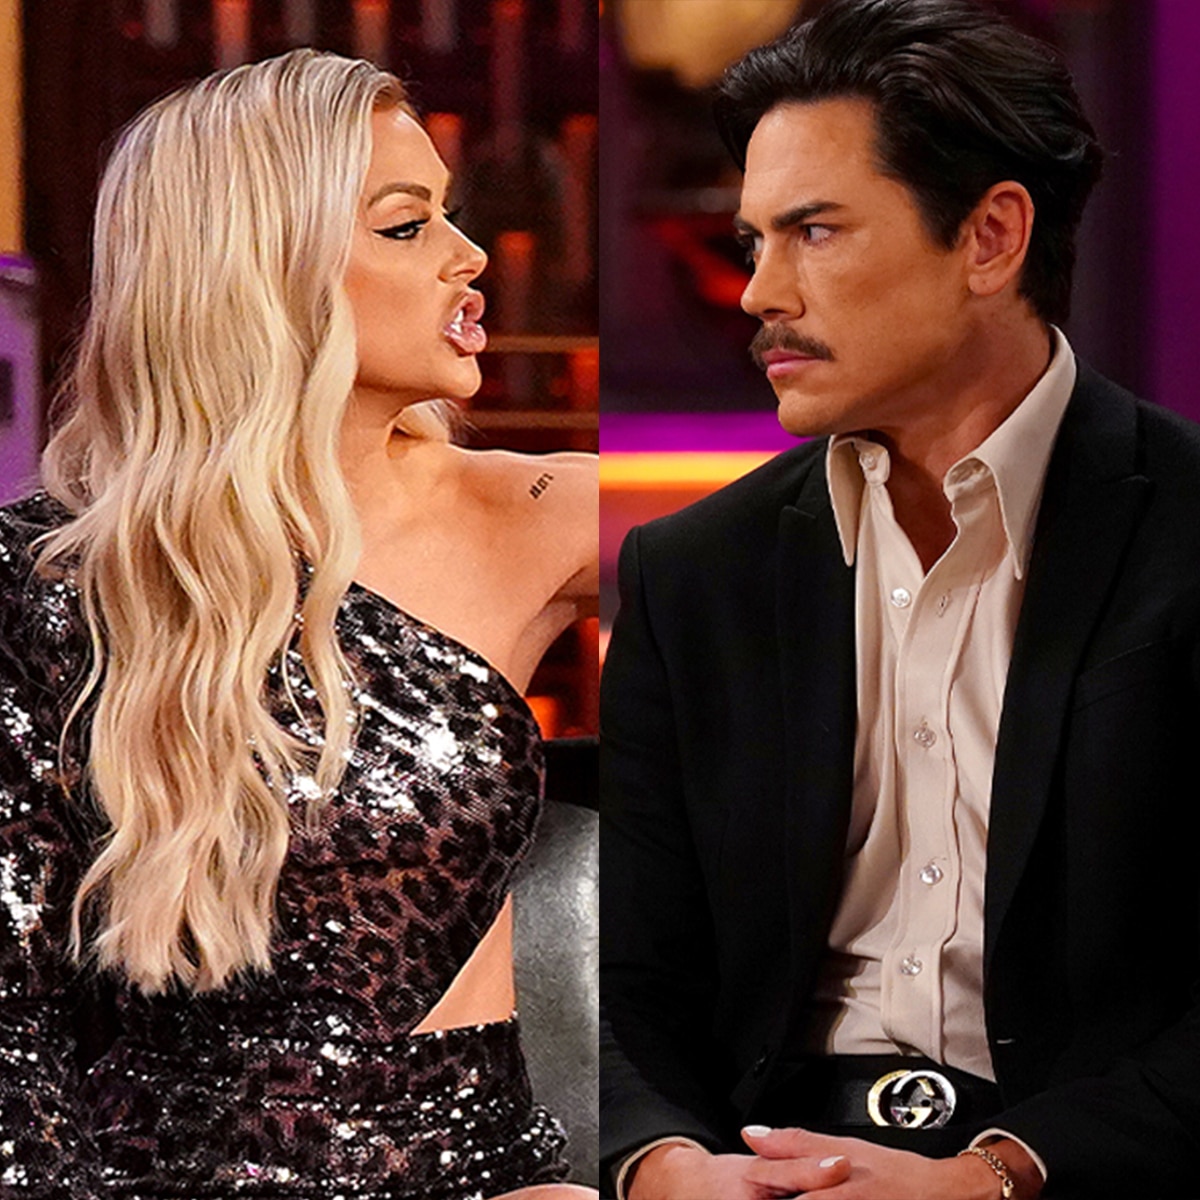 Lala Kent Slams Tom Sandoval Over Comment He Made About Her Daughter pic